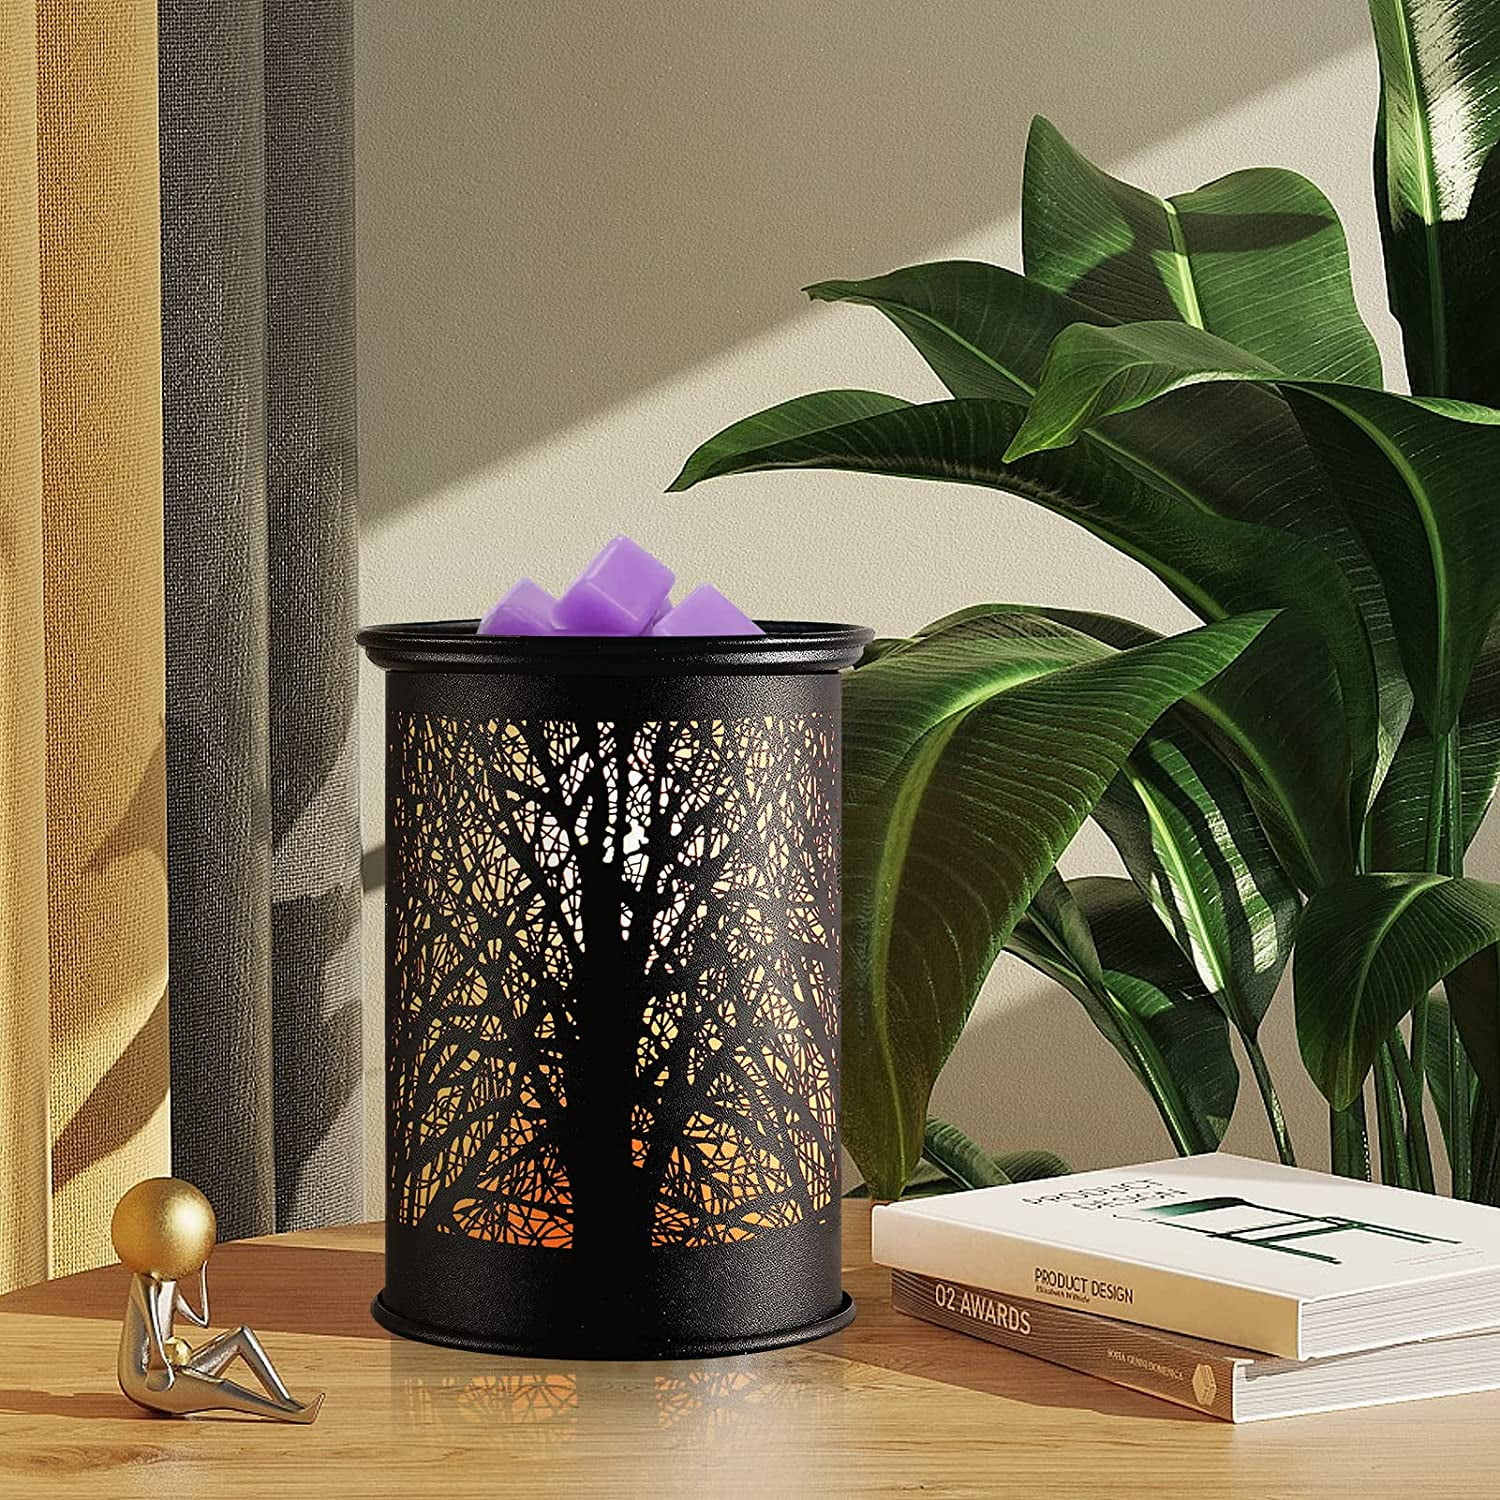 Crystal Wax Melt Warmer, Ornix Electric Wax Warmer for Scented Wax, Oil Burner Wax Melt Night Light for Gift, Home, Spa, Office, Size: 3.74 x 3.74 x